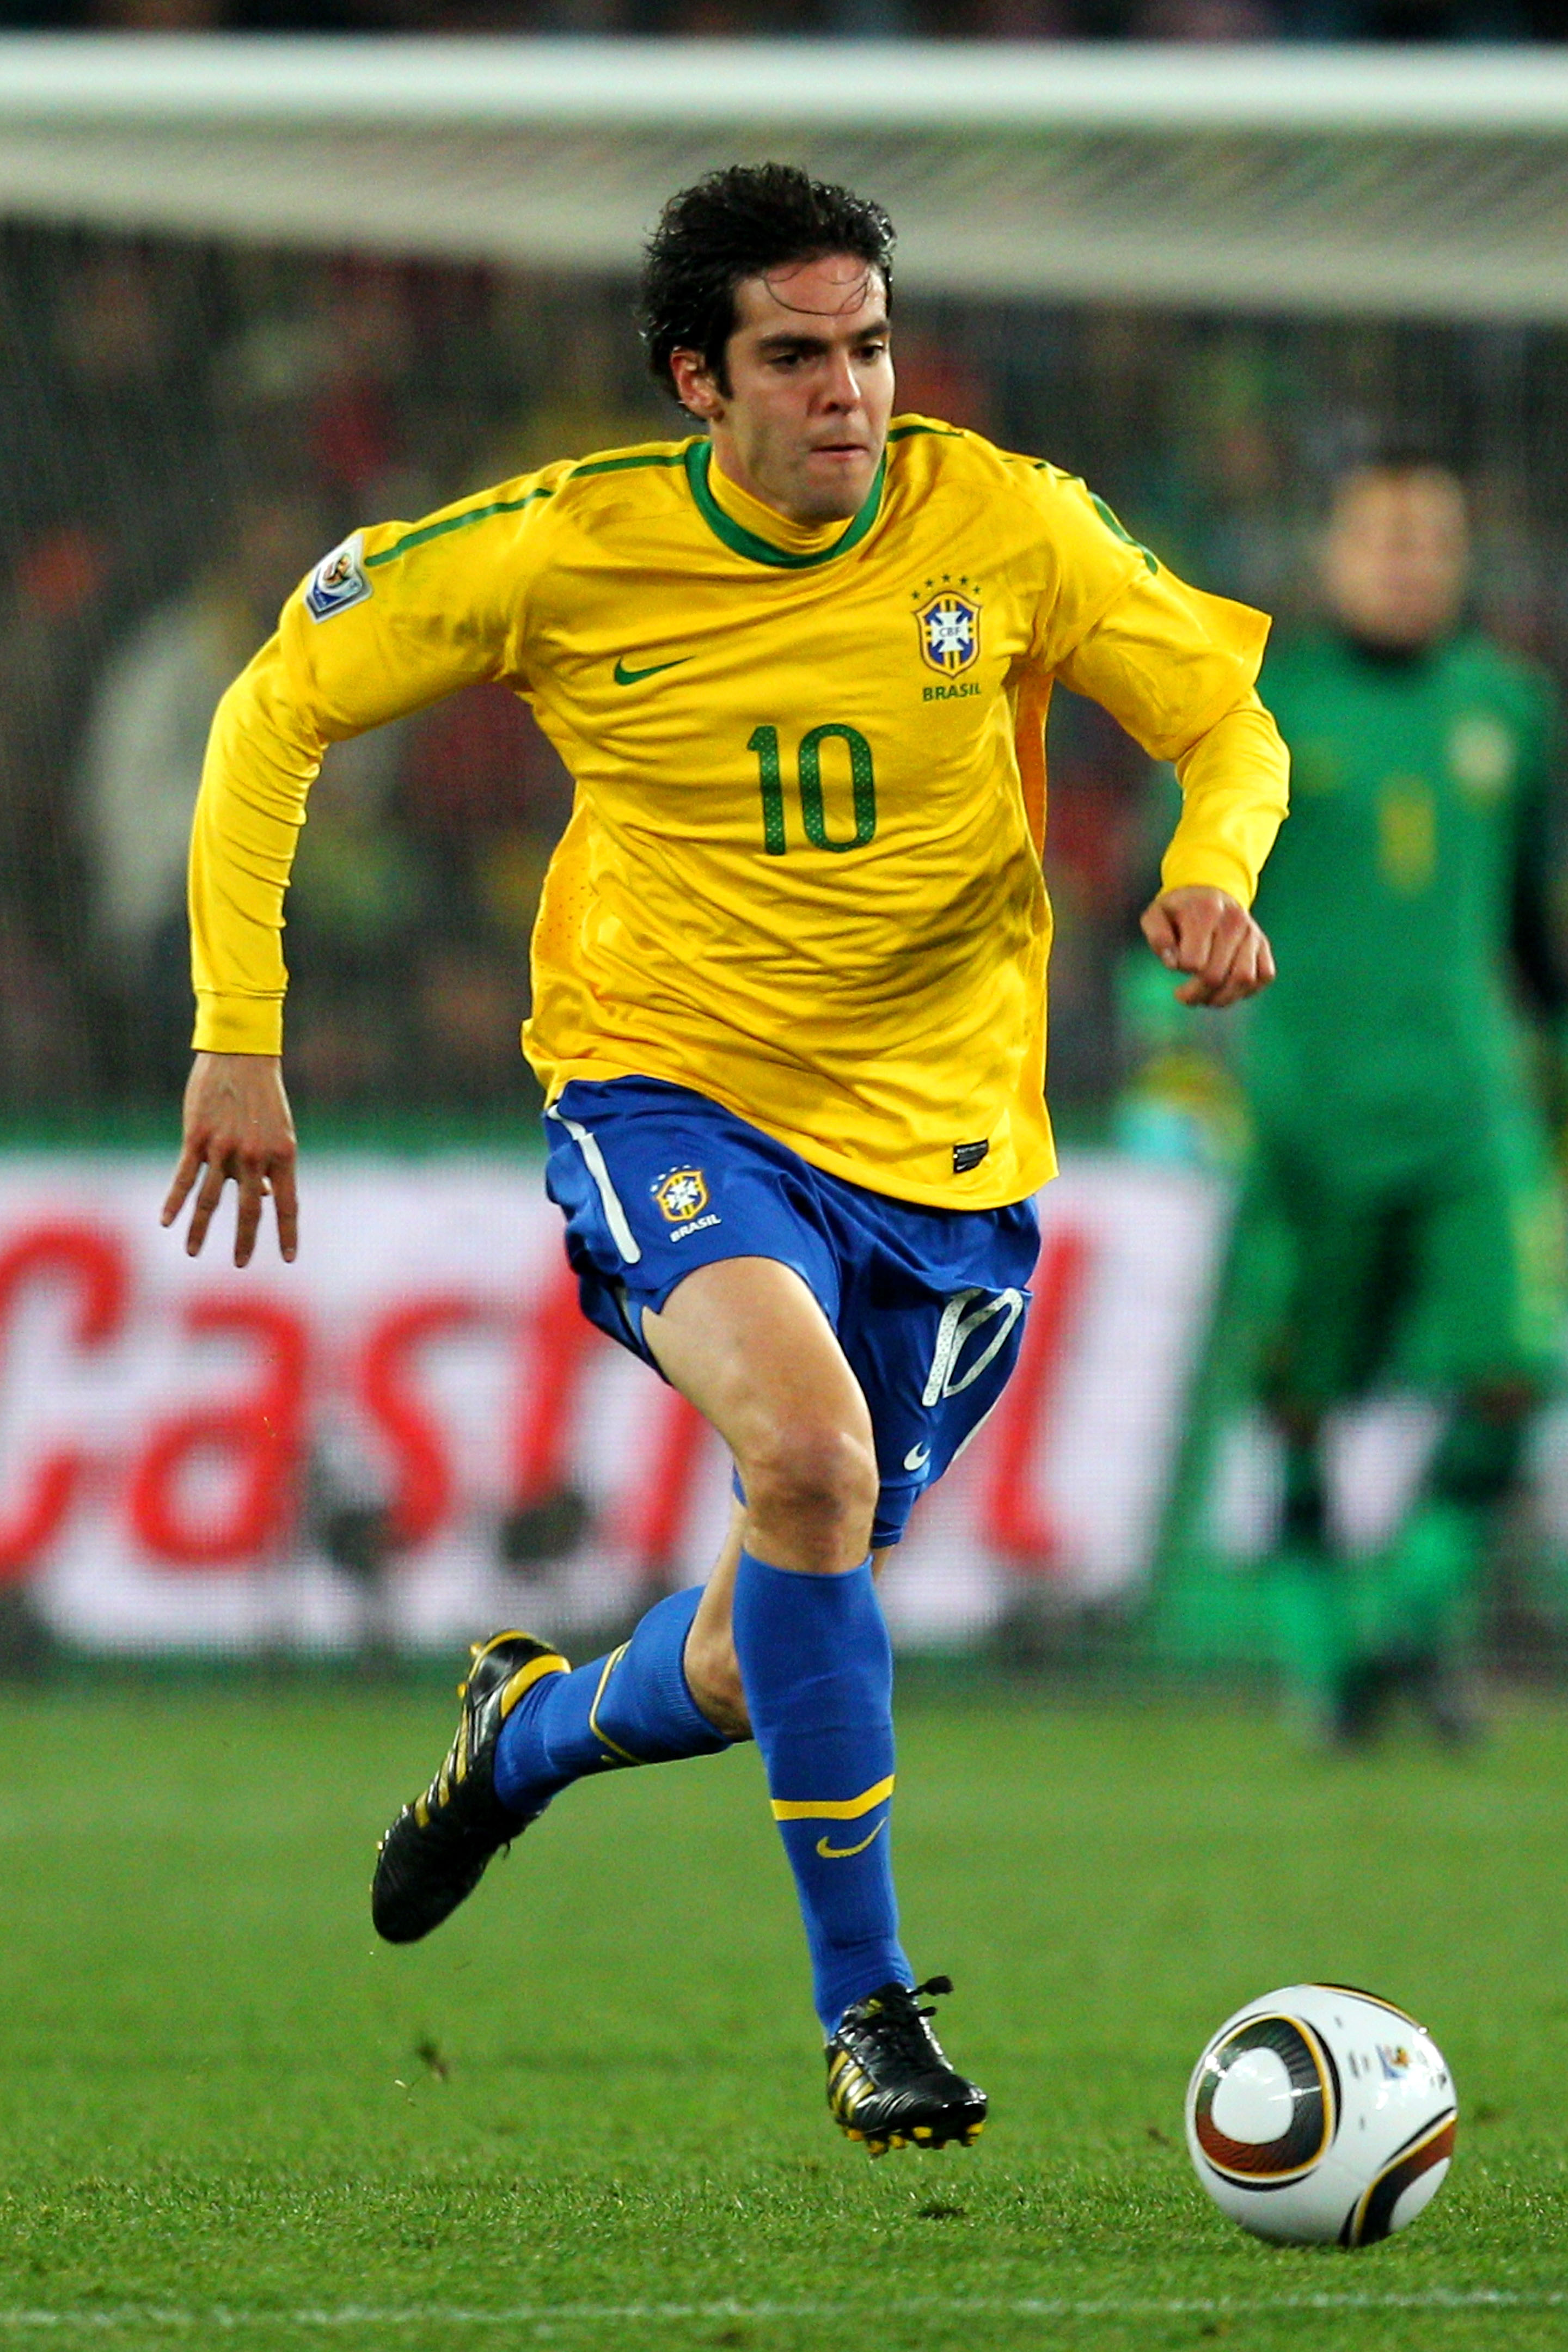 JOHANNESBURG, SOUTH AFRICA - JUNE 28:  Kaka of Brazil runs with the ball during the 2010 FIFA World Cup South Africa Round of Sixteen match between Brazil and Chile at Ellis Park Stadium on June 28, 2010 in Johannesburg, South Africa.  (Photo by Cameron S